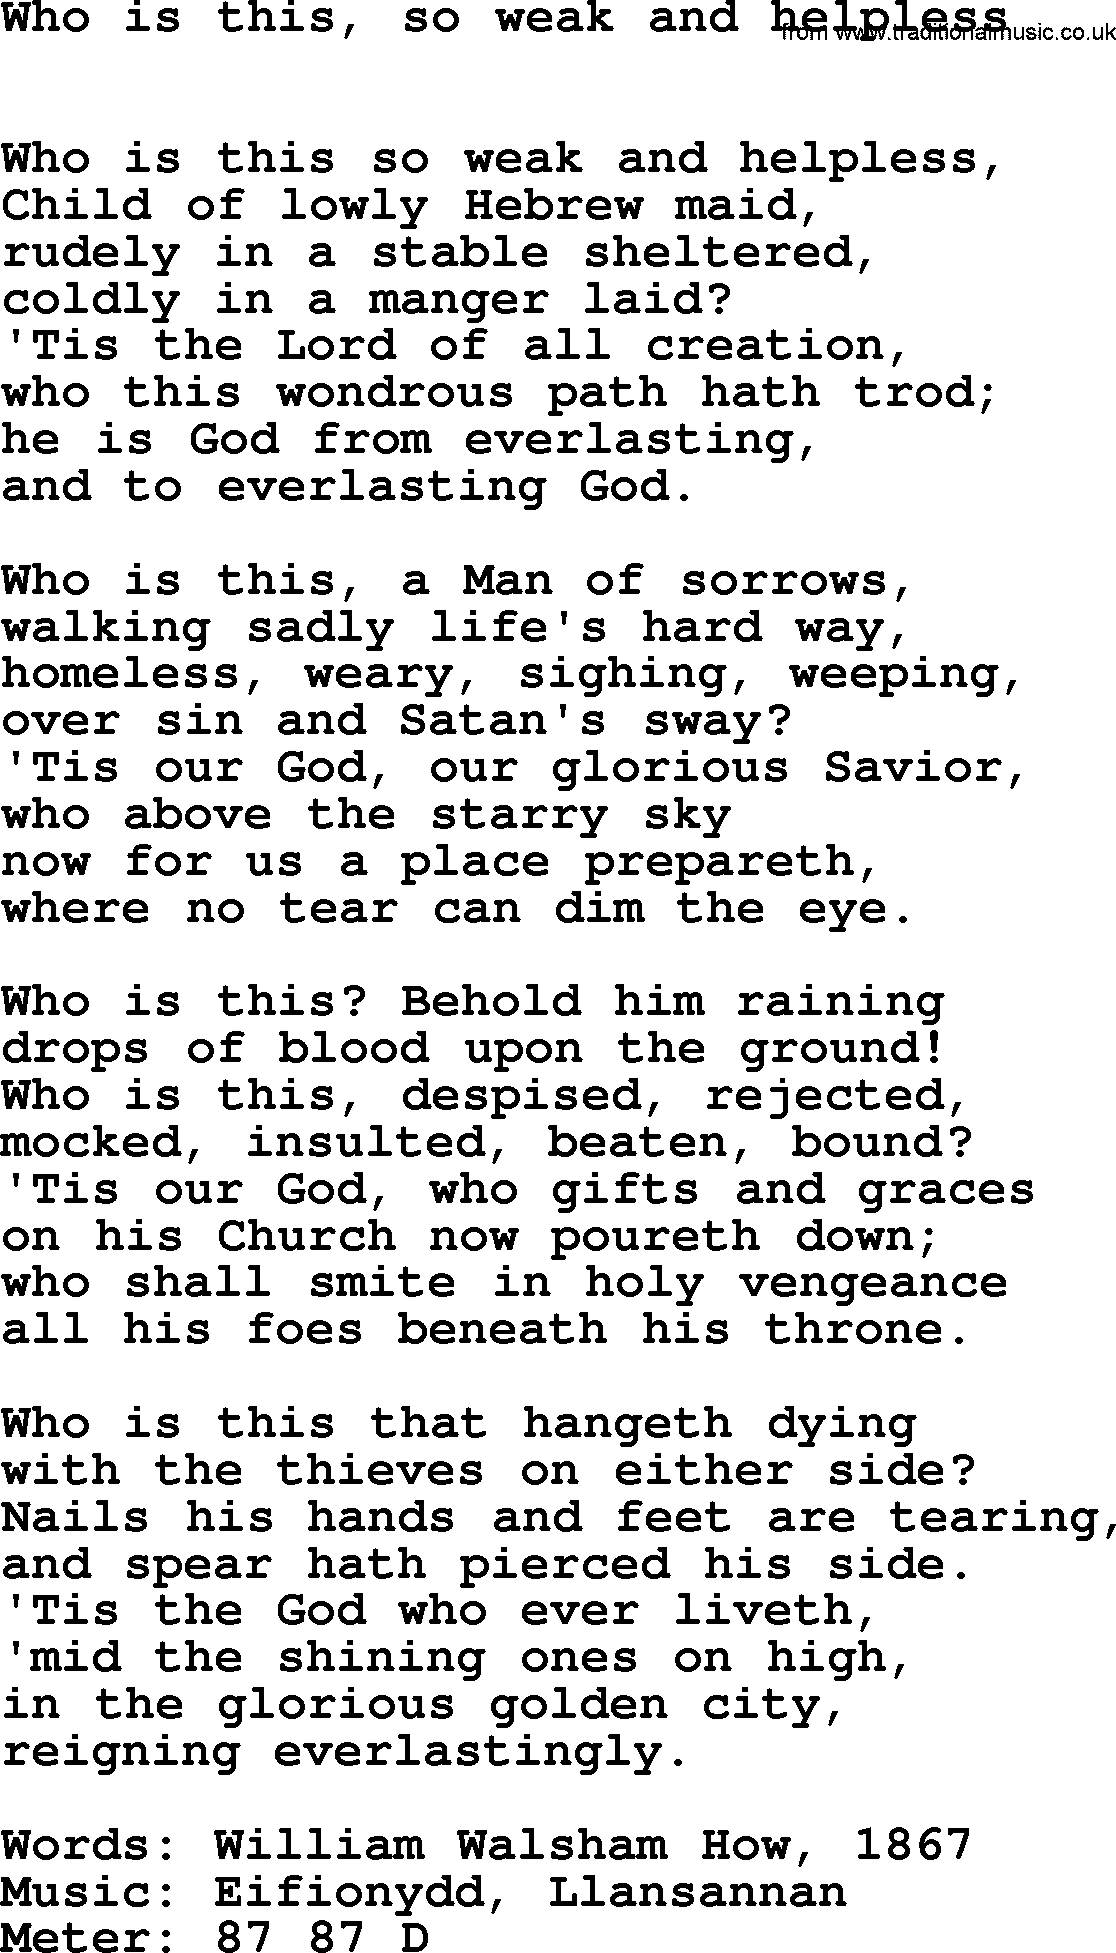 Book of Common Praise Hymn: Who Is This, So Weak And Helpless.txt lyrics with midi music